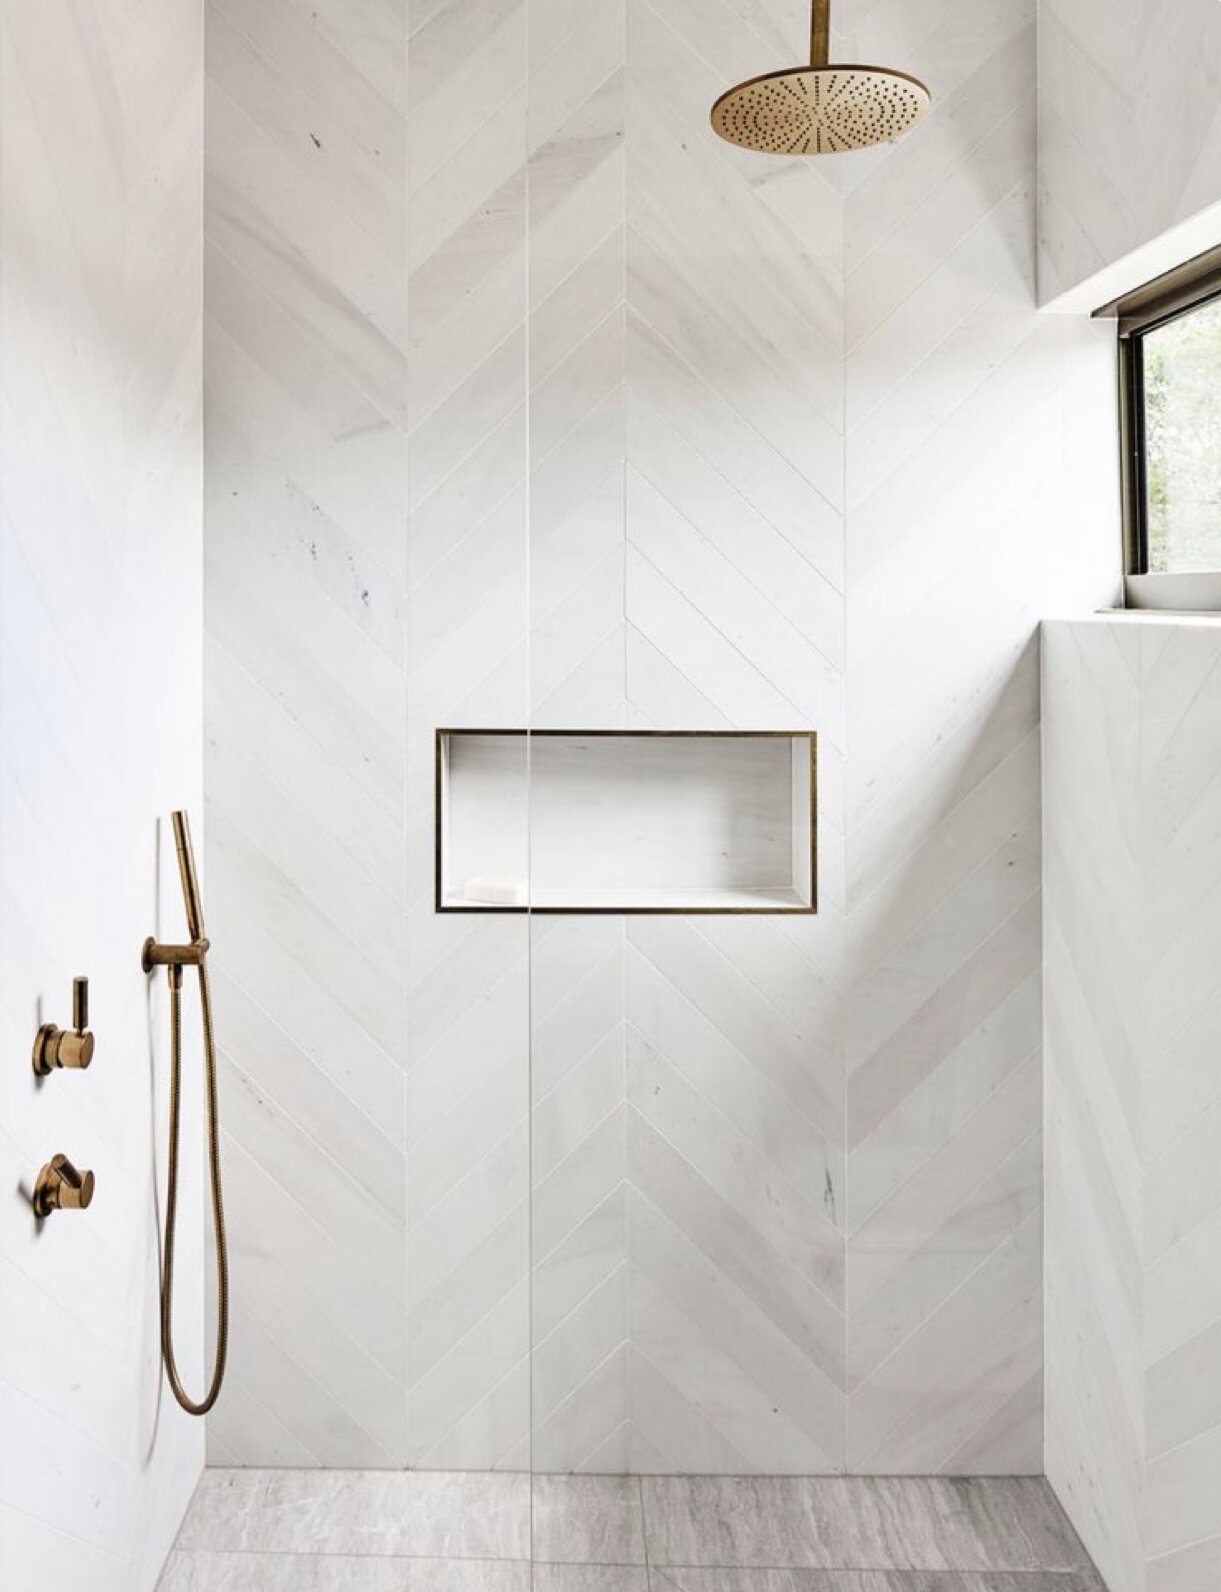 white tiles in the shower, laid in a chevron pattern